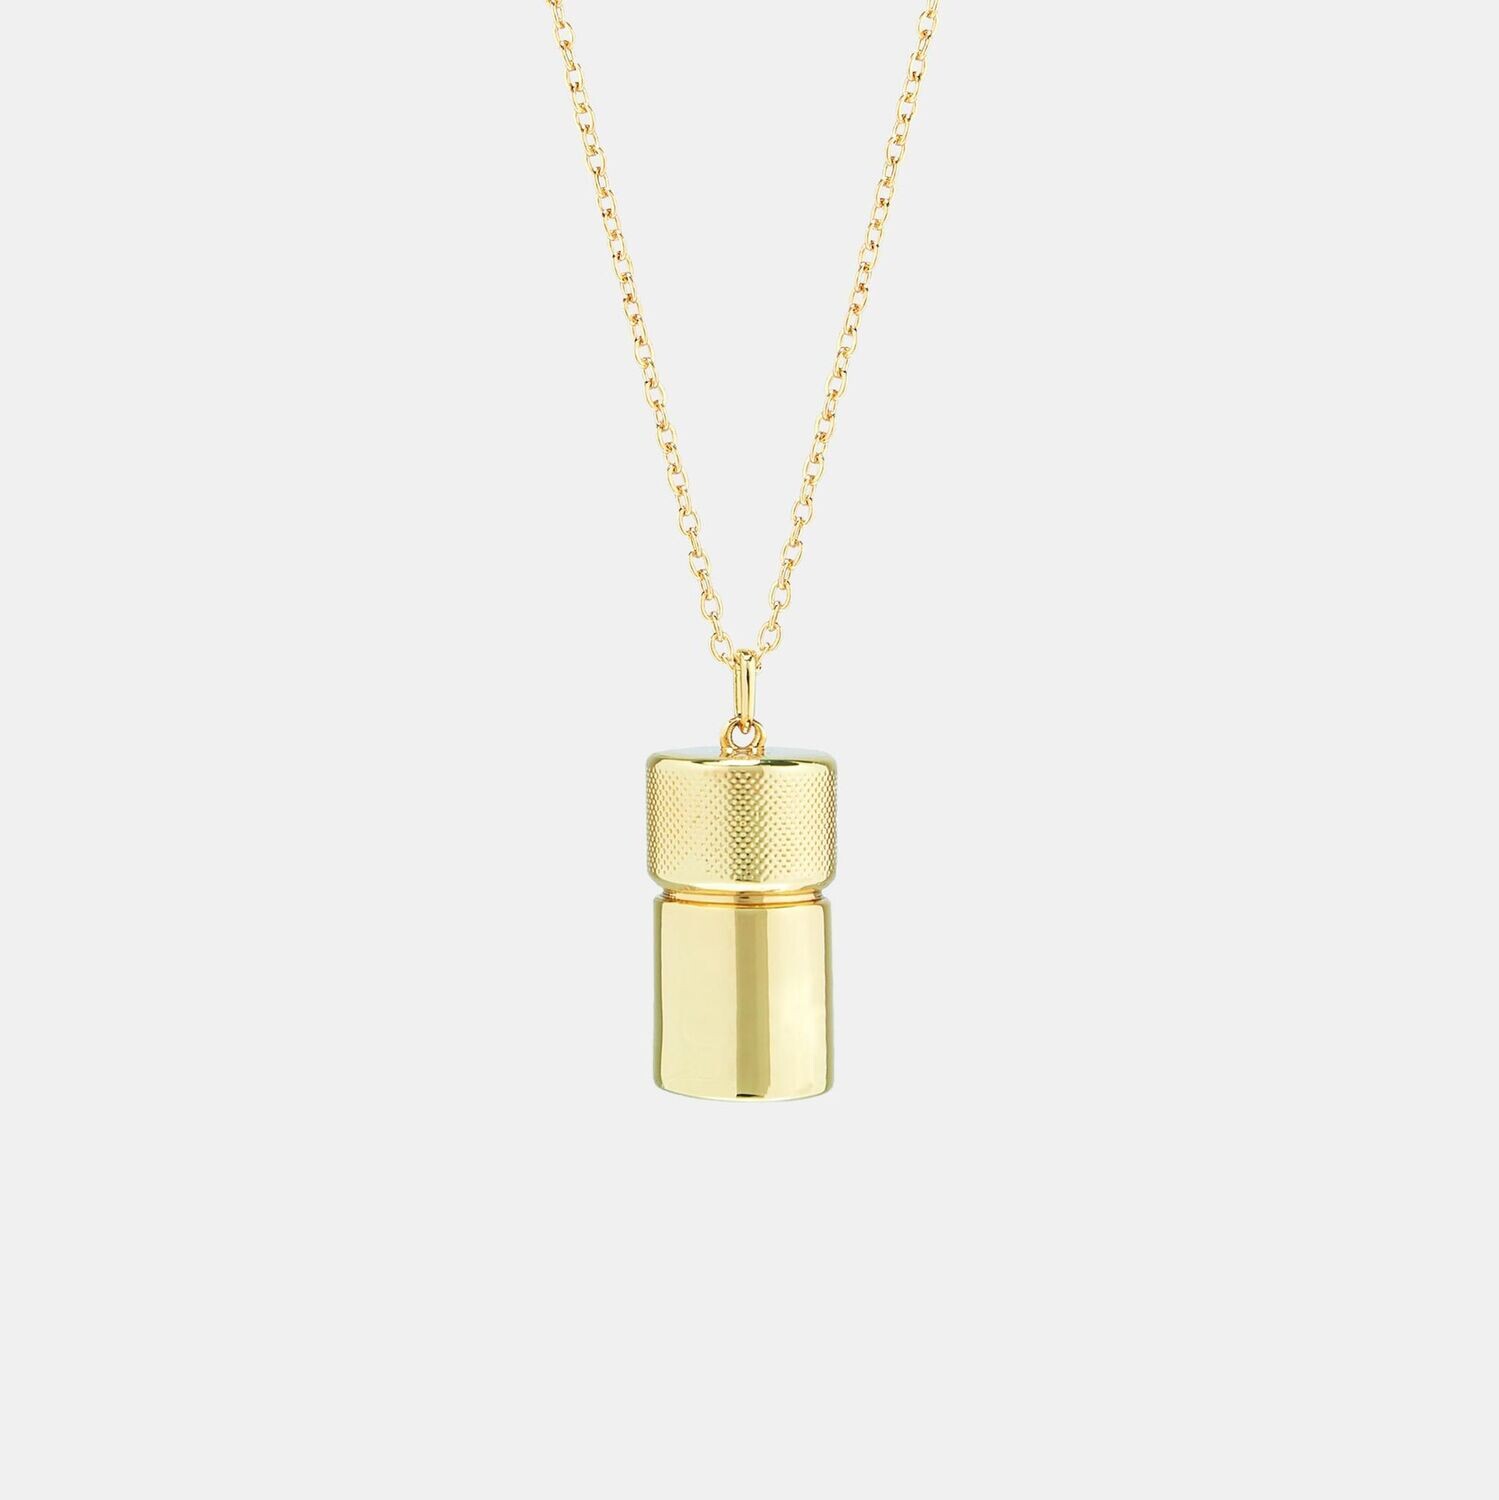 Hoemo World - Poppers Pendant Necklace - Gold